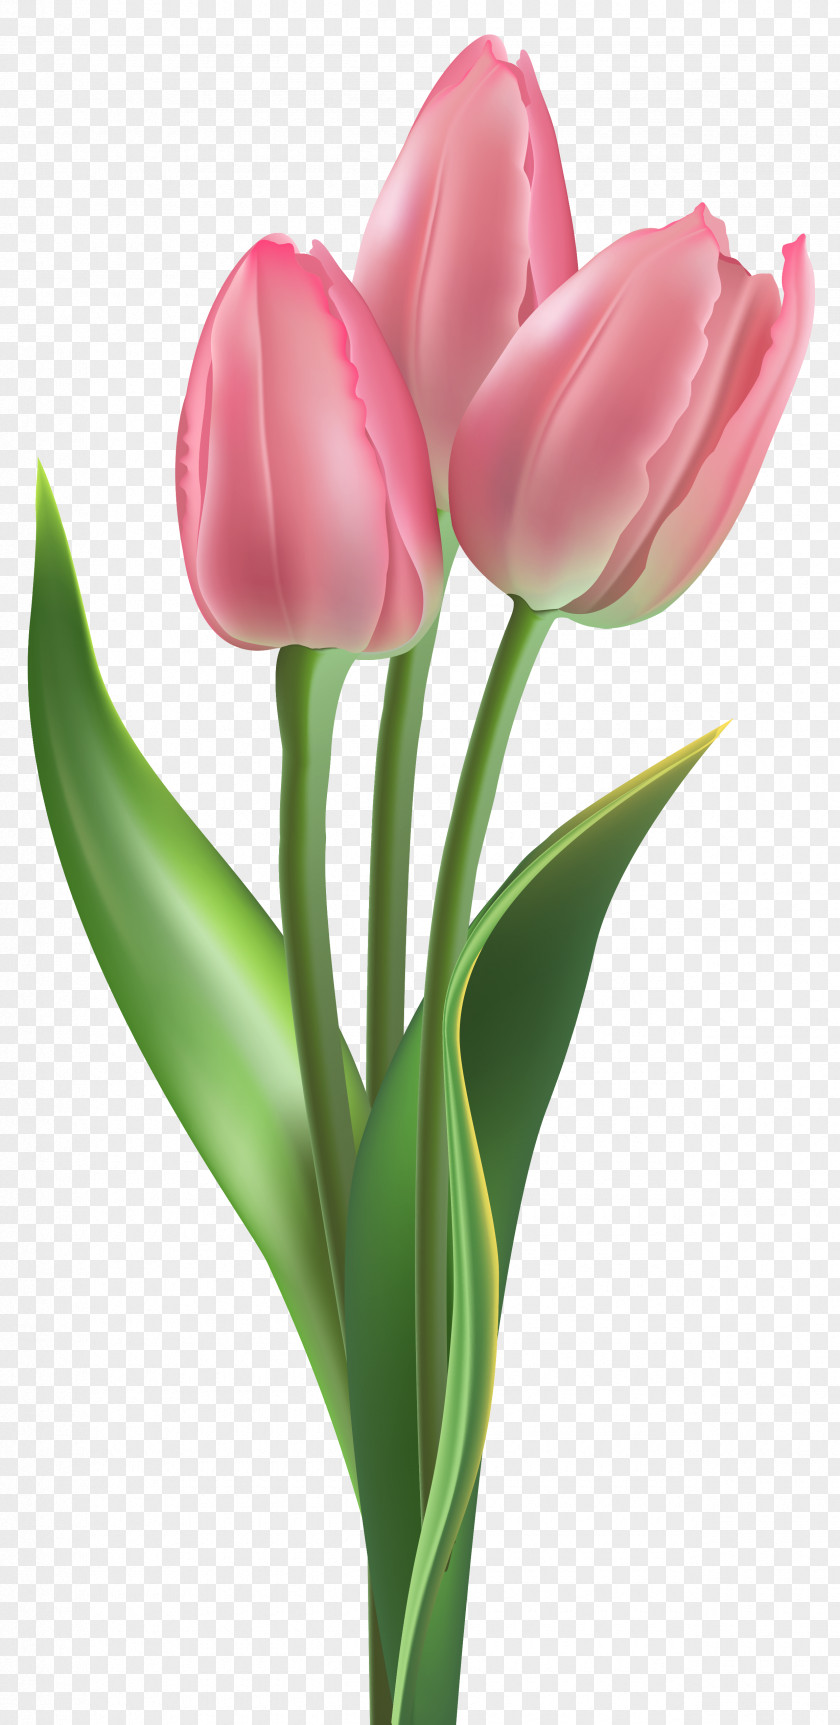 Soft Pink Tulips Clipart Image Tulip Flower Clip Art PNG